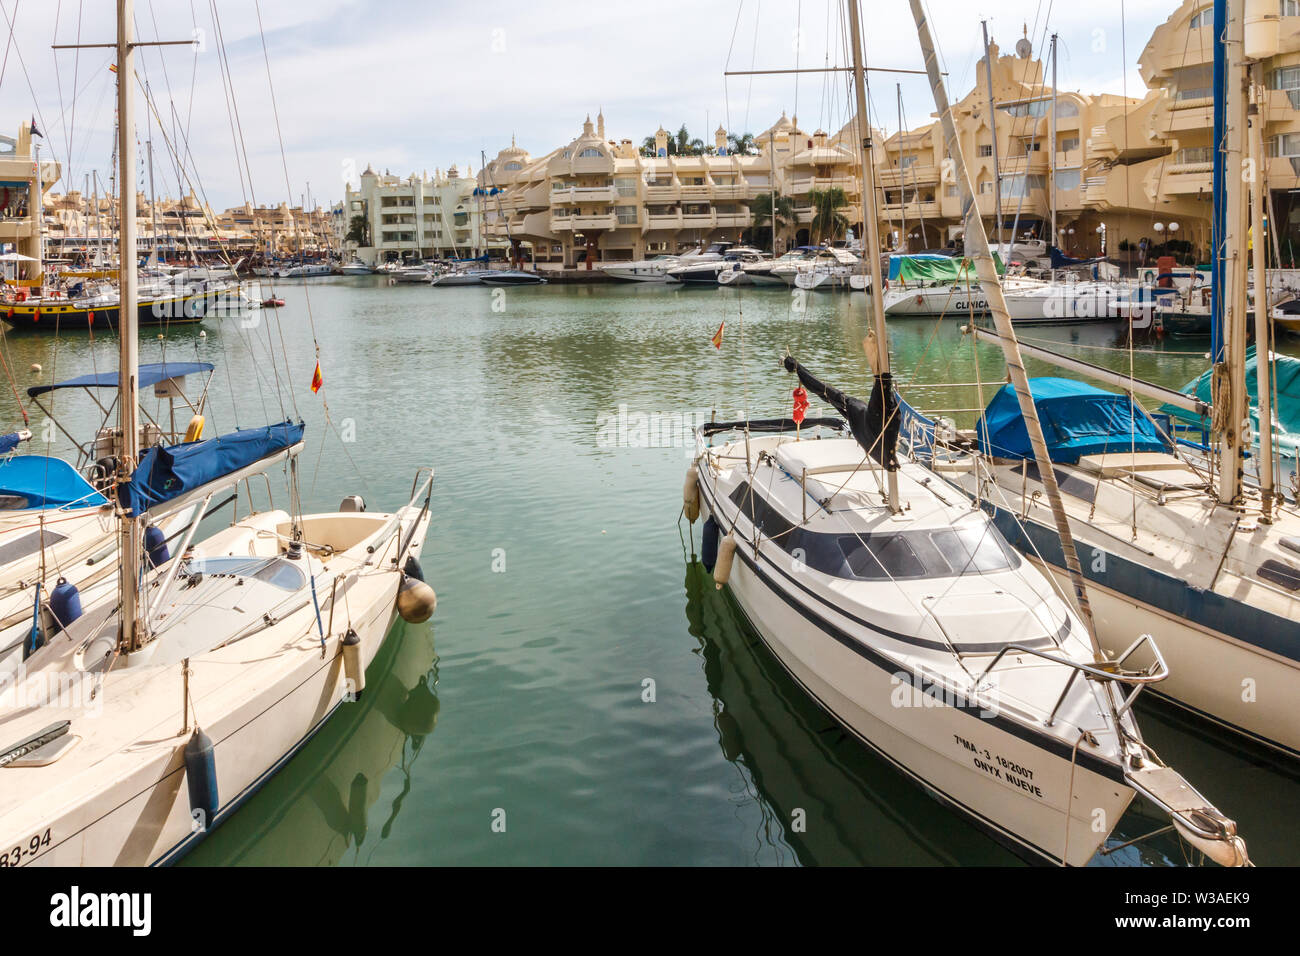 Benalmadena, Spain - September 4th 2015: Boats moored in the marina. The port has a capacity of over a thousand moorings. Stock Photo